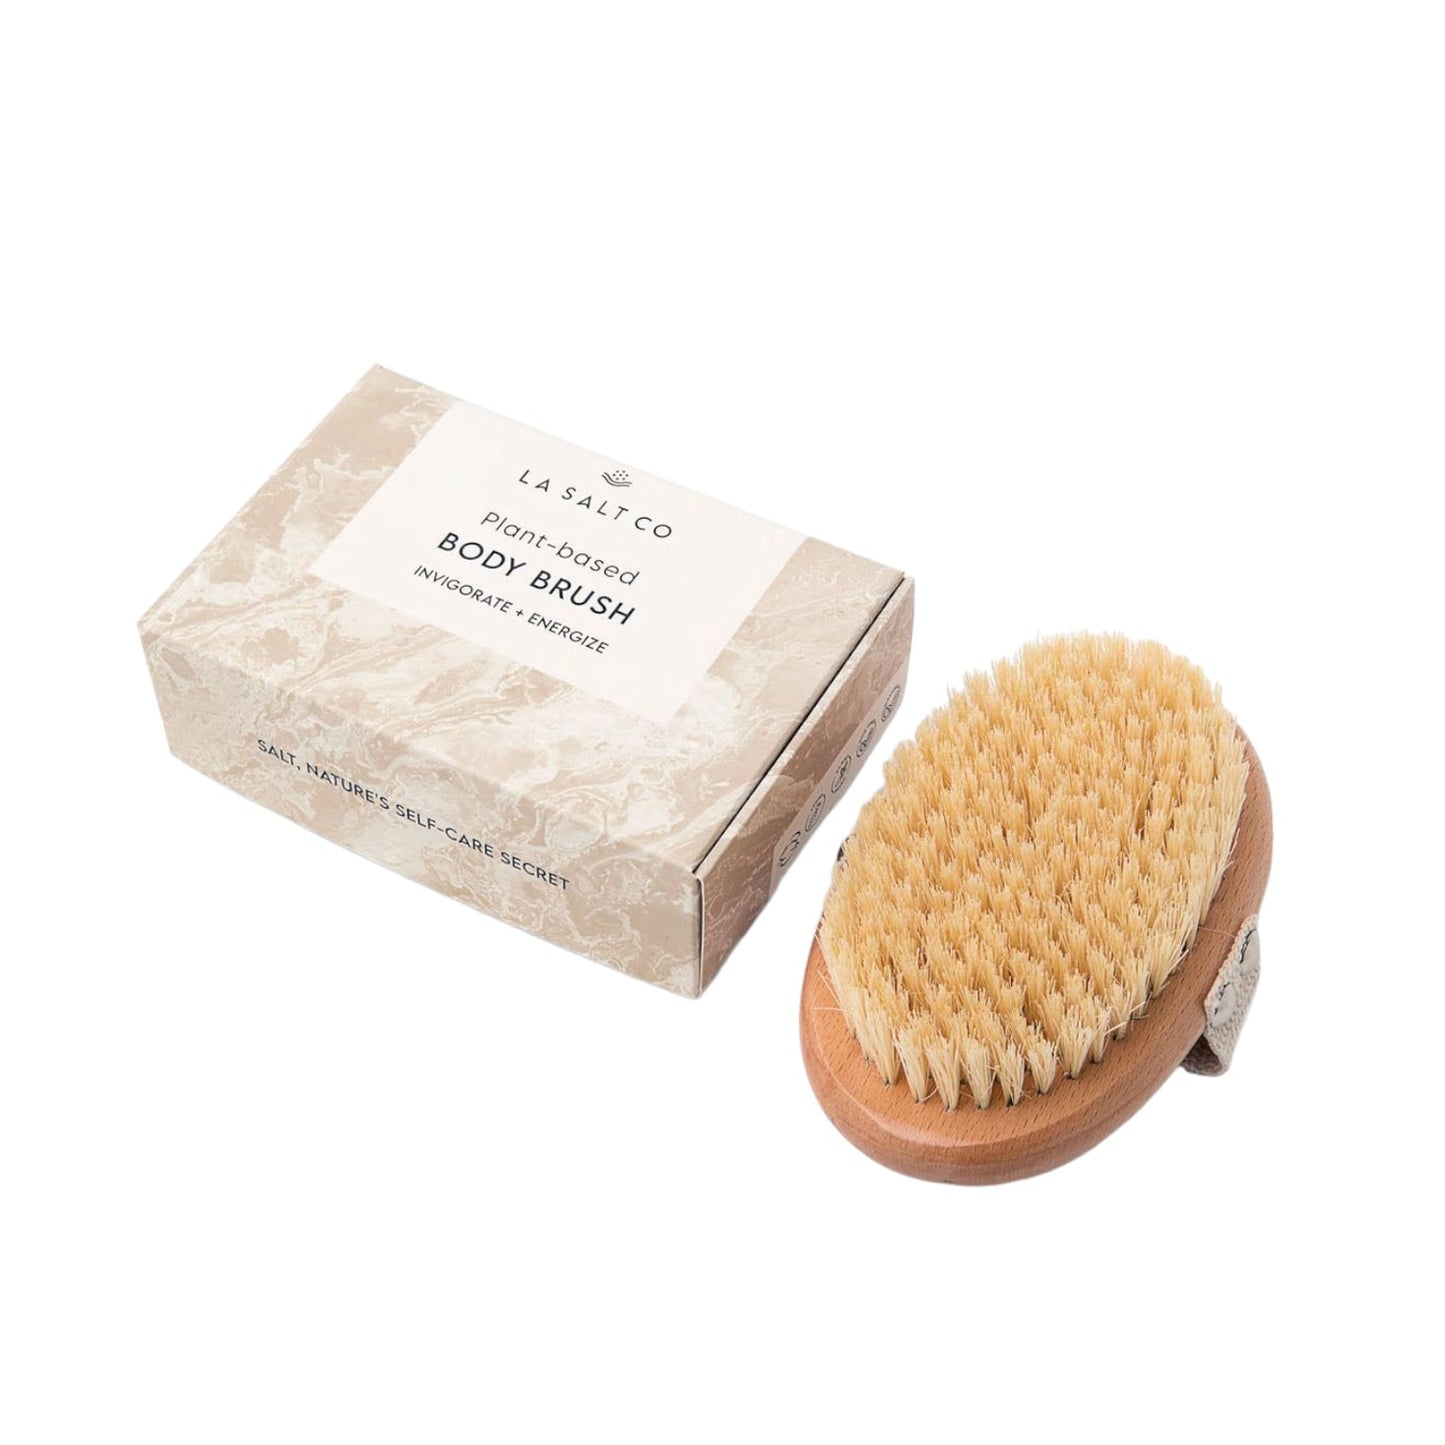 Plant-based body brush with wooden handle and strap